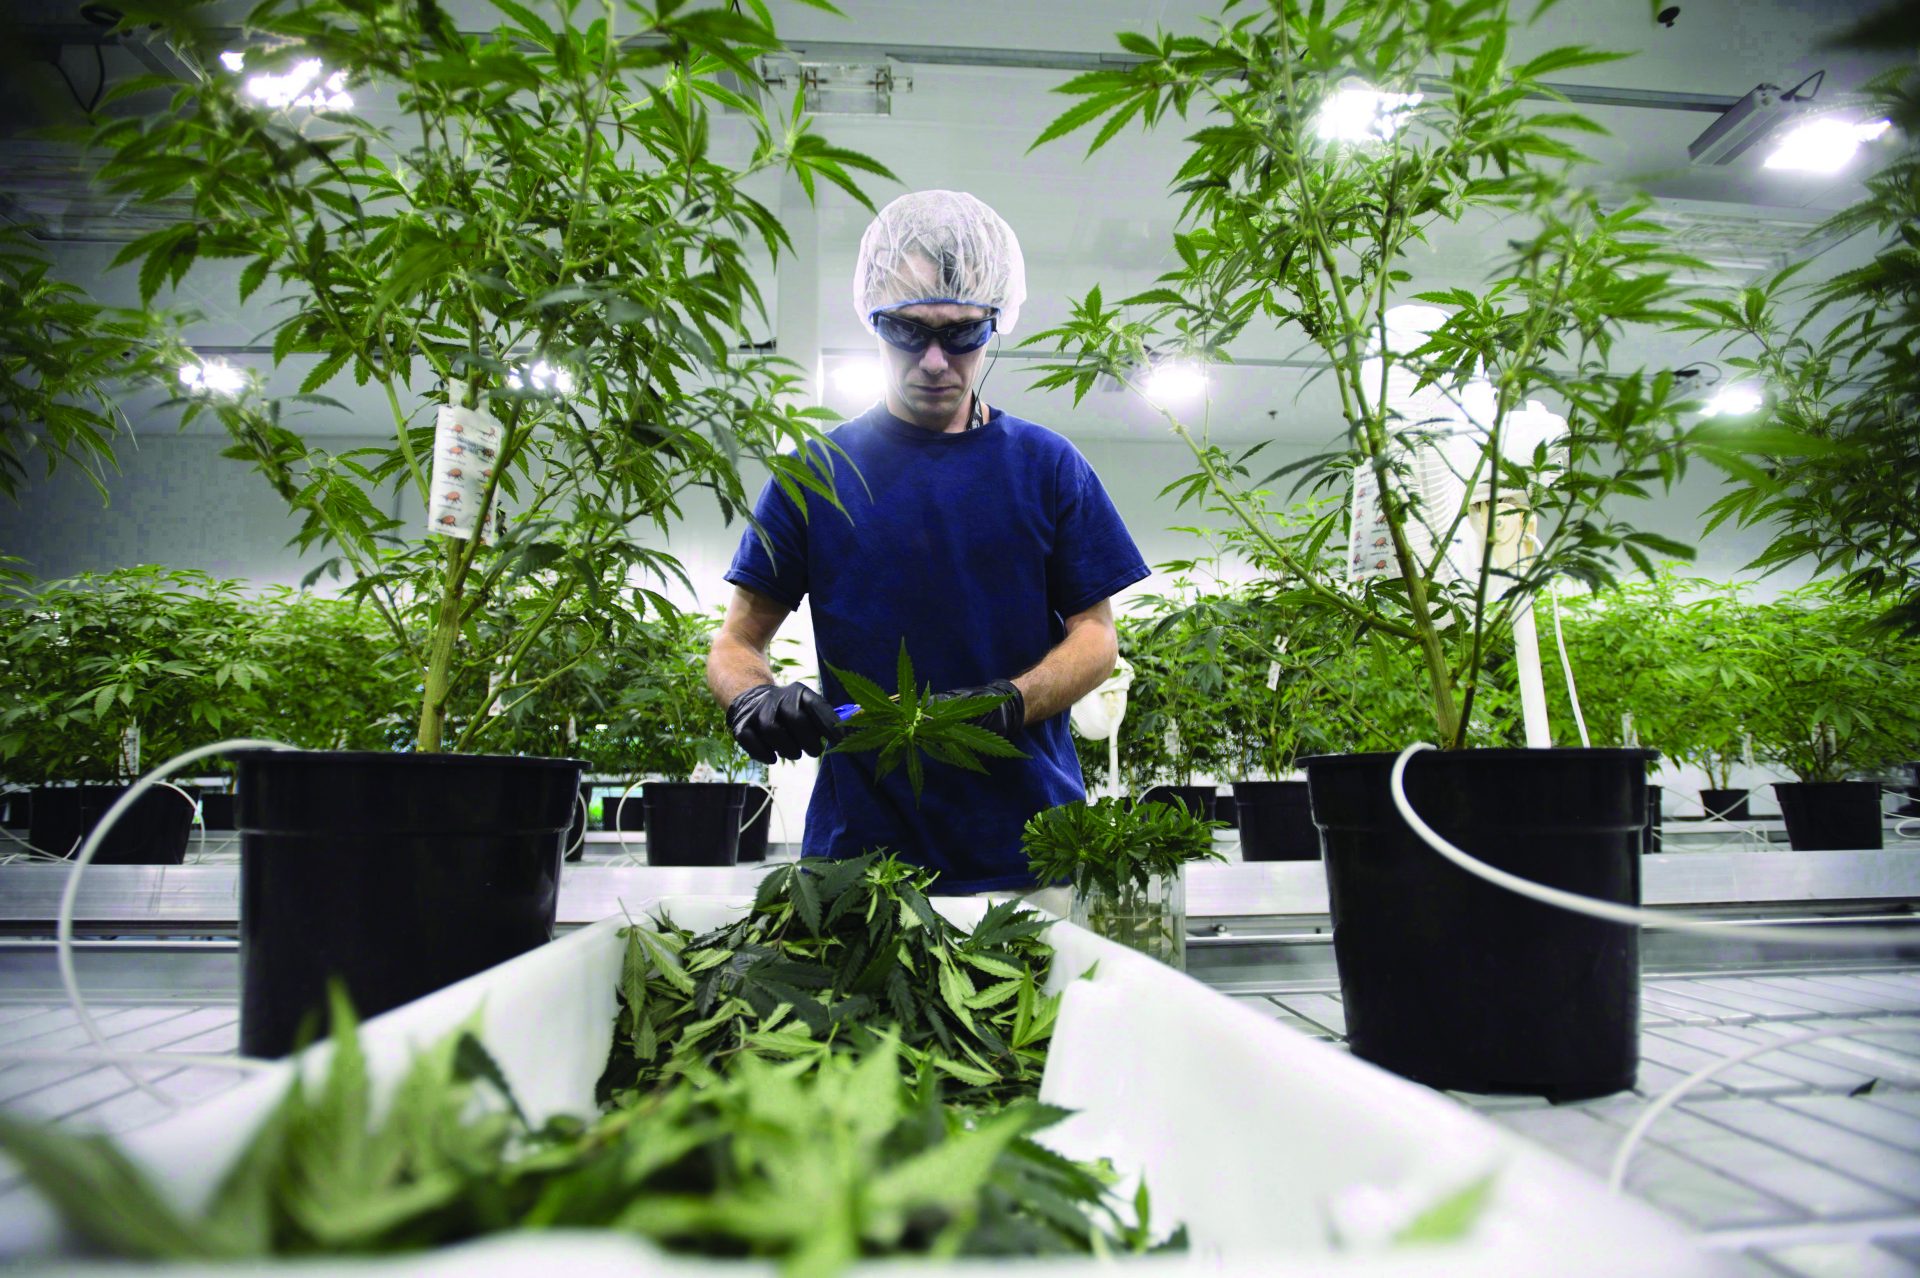 Workers produce medical marijuana at Canopy Growth Corporation's facility in Smiths Falls, Ont. (Photo: Sean Kilpatrick/The Canadian Press)